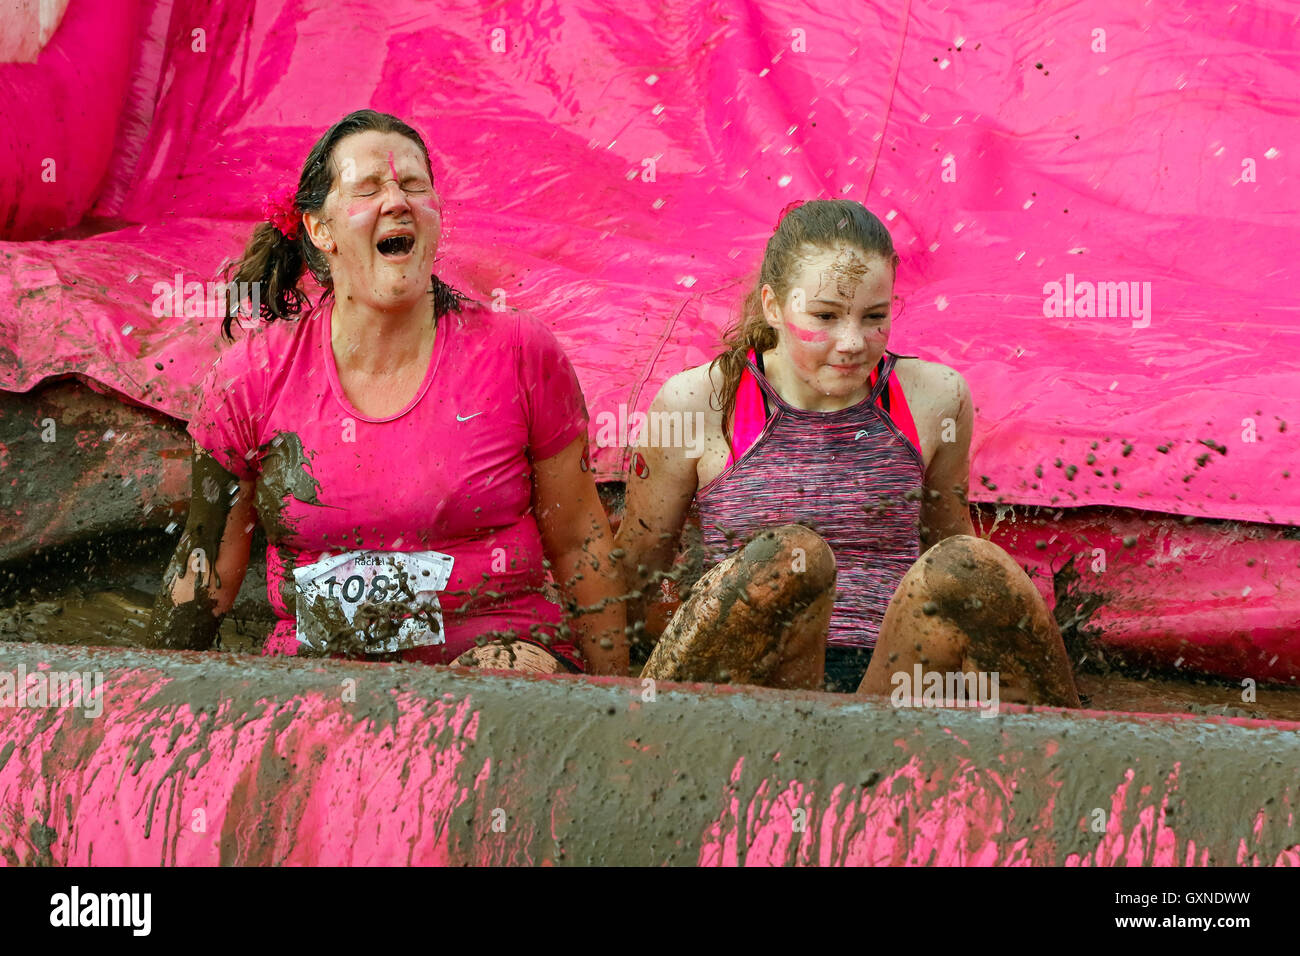 Glasgow, Scotland, UK. 17th September, 2016. Thousands of women took part in the Bellahouston Park Pretty Muddy 5k across obstacles, through pipes, across fields on spacehoppers and over mud slides to raise awareness and funds for Cancer Research UK. Many ran in teams and with friends and all finished laughing and very, very muddy! Credit:  Findlay/Alamy Live News Stock Photo